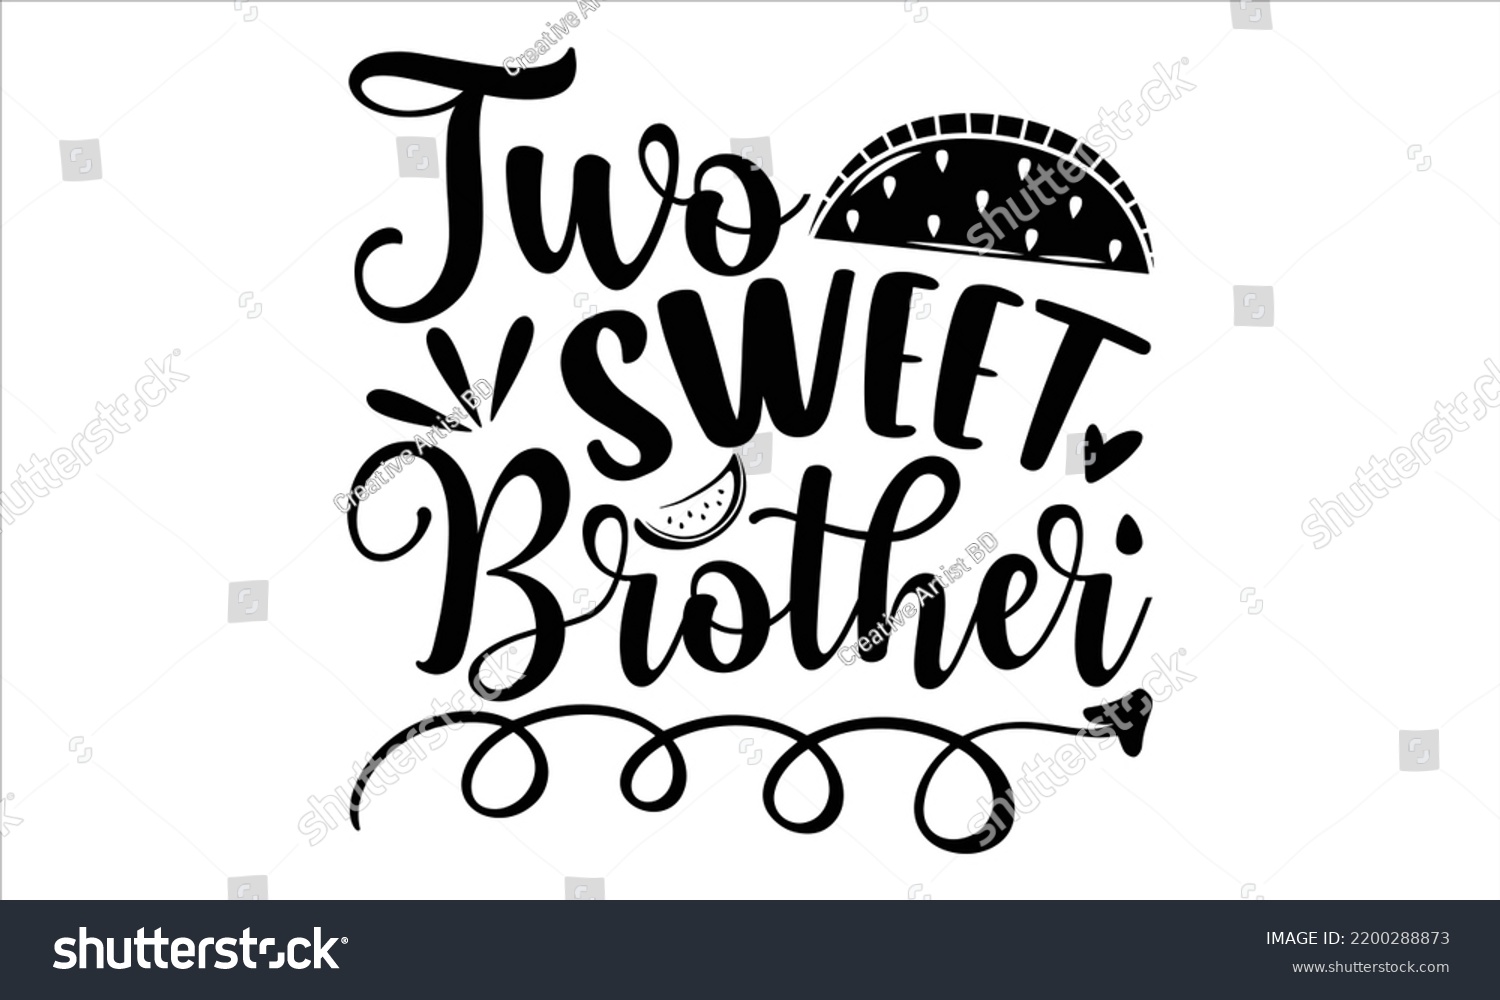 SVG of Two Sweet Brother  - Watermelon T shirt Design, Modern calligraphy, Cut Files for Cricut Svg, Illustration for prints on bags, posters svg